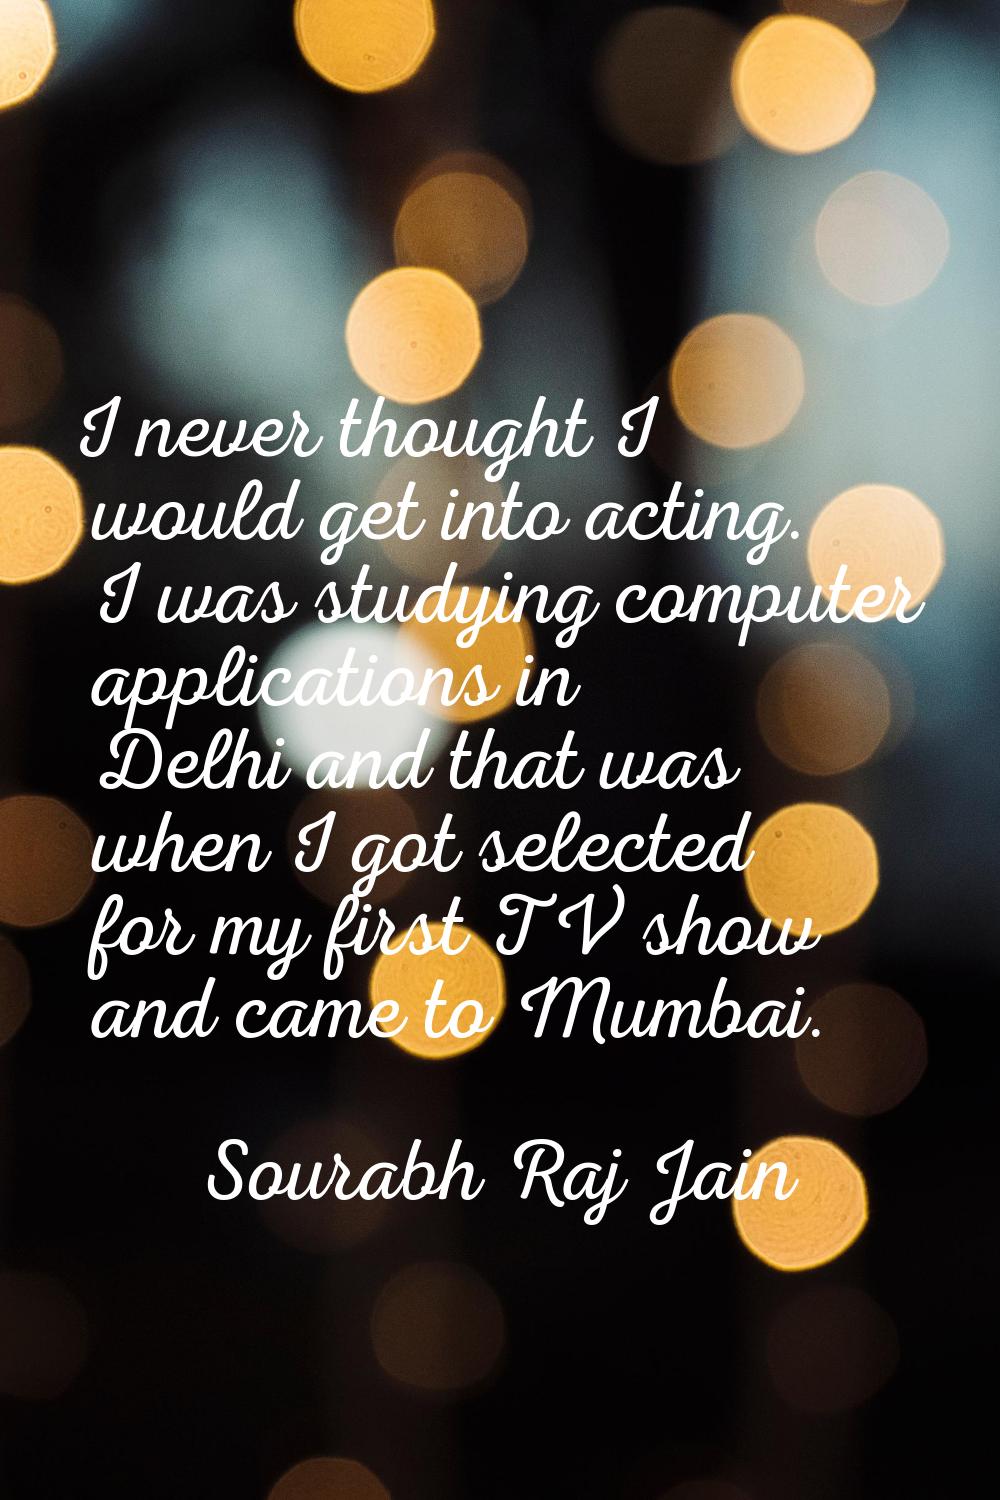 I never thought I would get into acting. I was studying computer applications in Delhi and that was